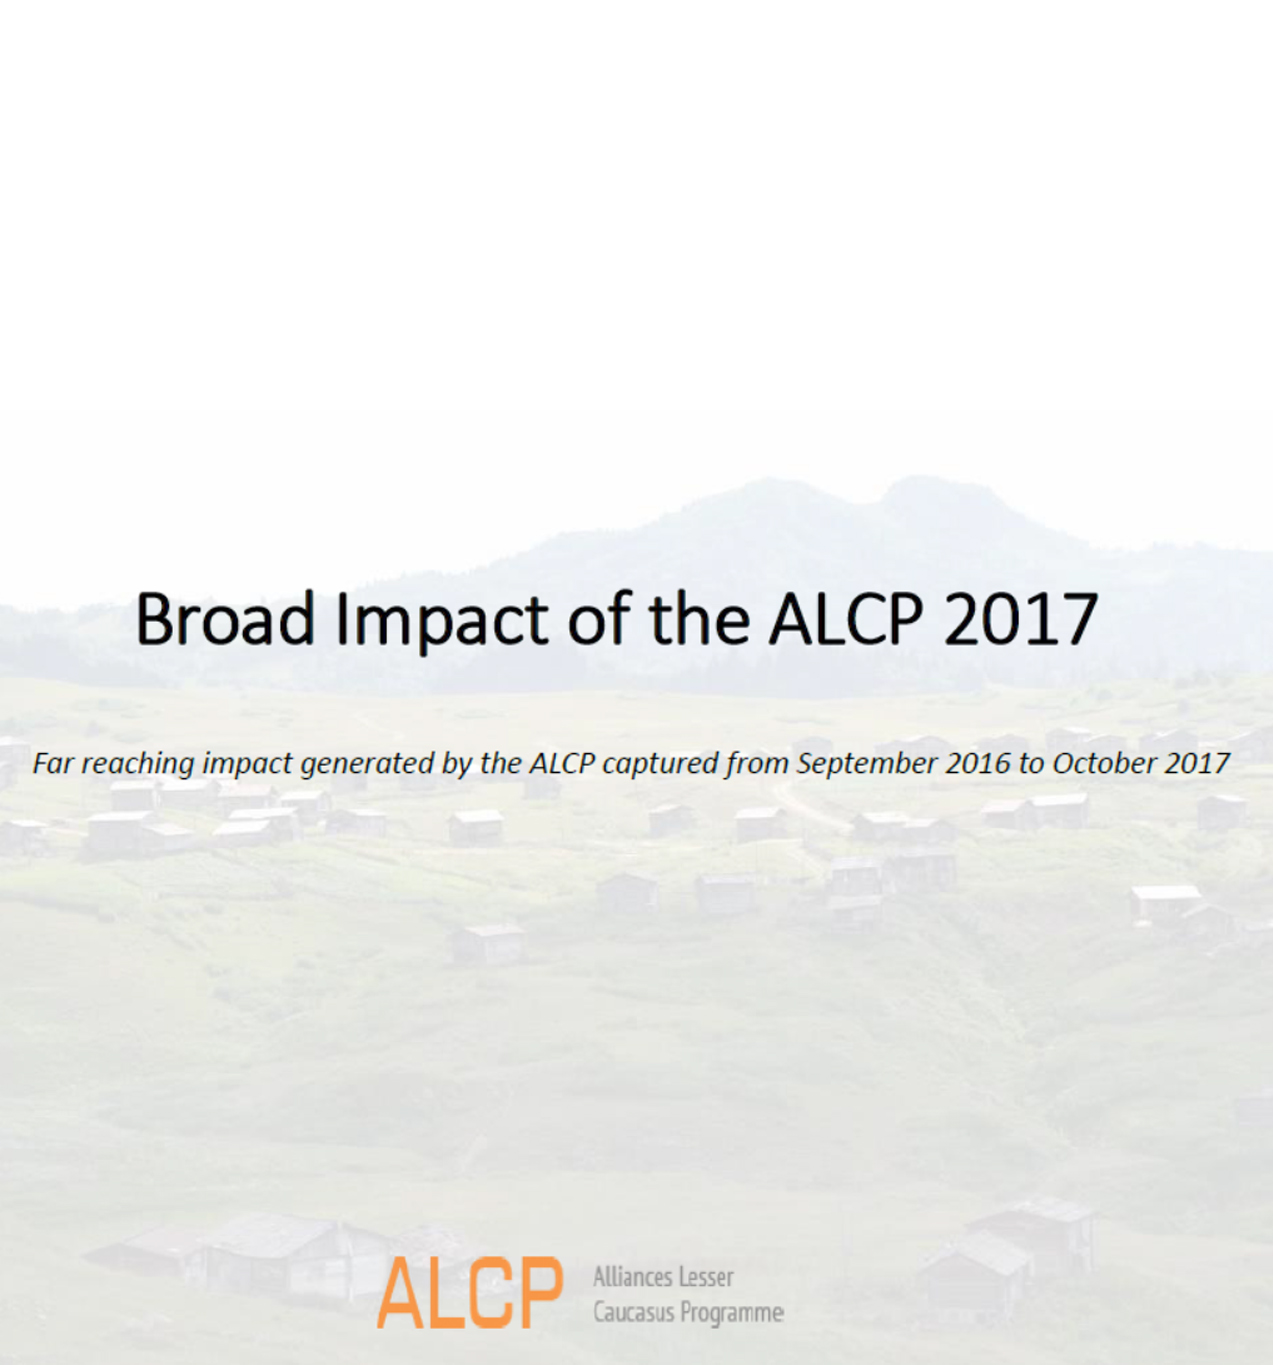 Broad Impact of the ALCP - 2017